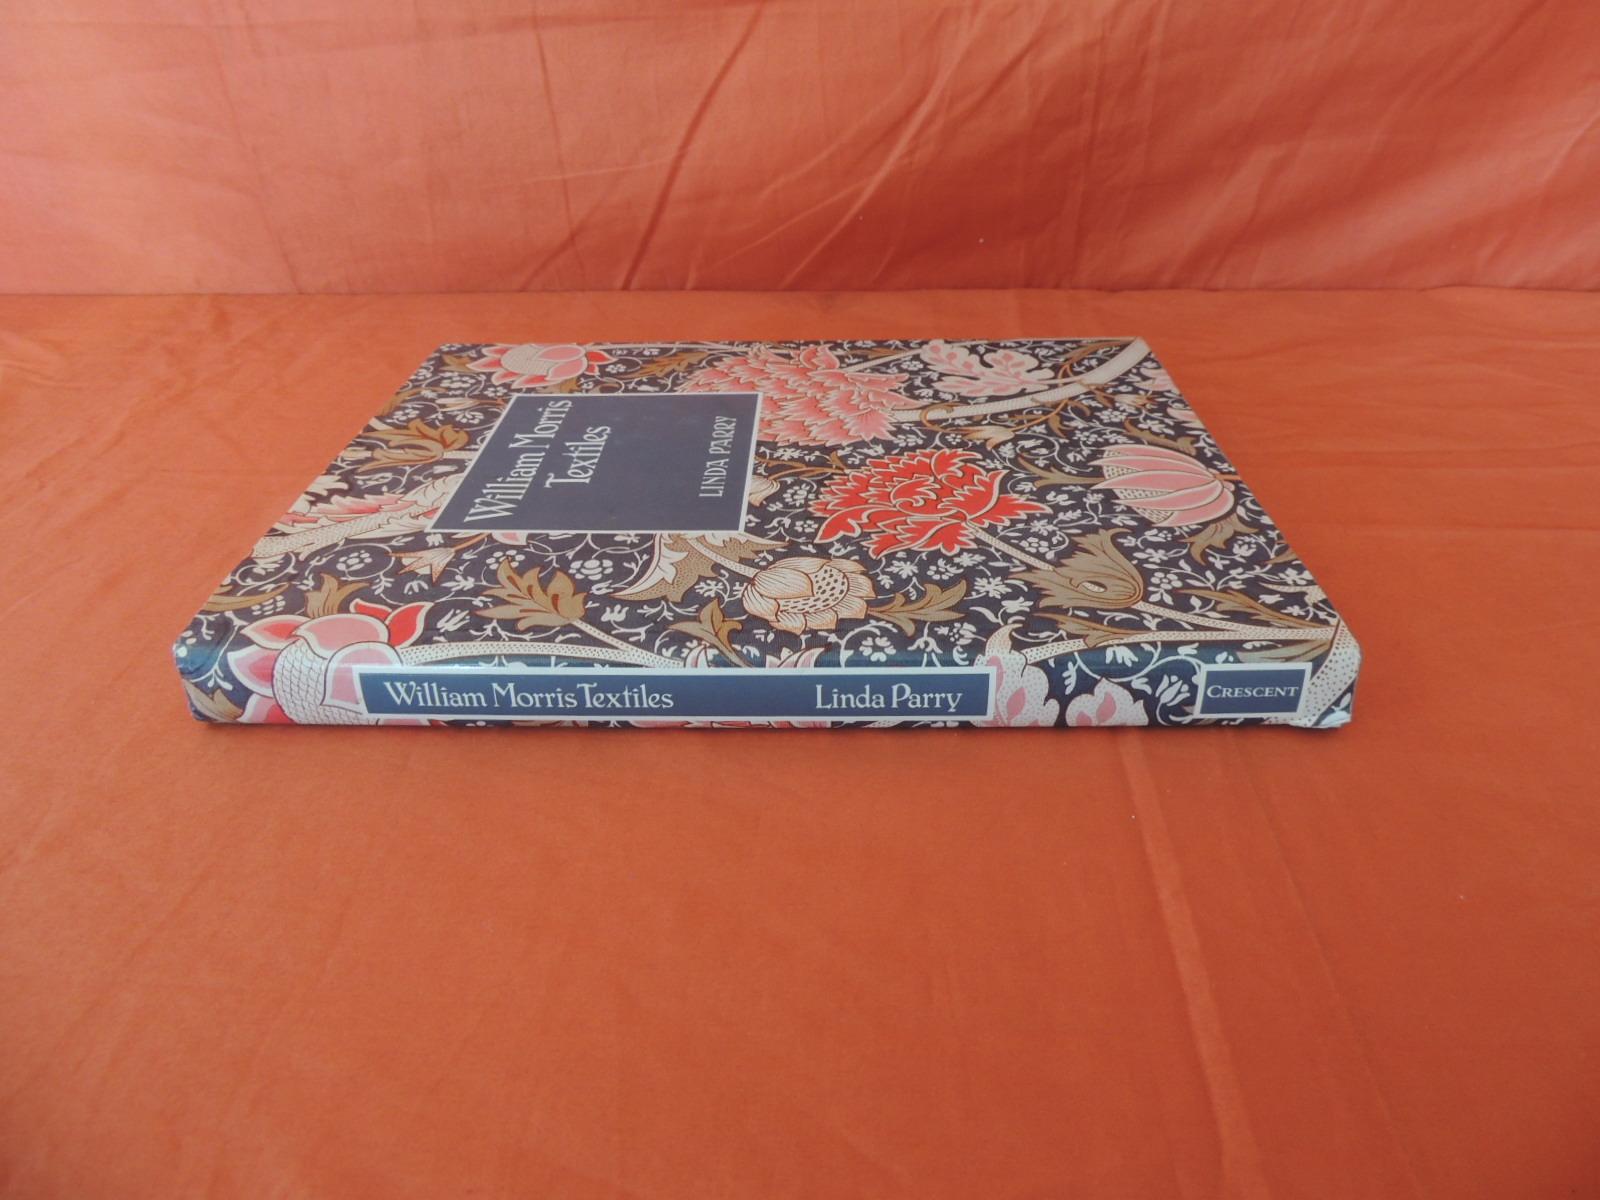 William Morris Textiles vintage decorative hard-cover book by Linda Parry
William Morris Textiles was the first comprehensive survey of the many hundreds of original, colorful textiles produced by William Morris (1834–1896) and the two commercial